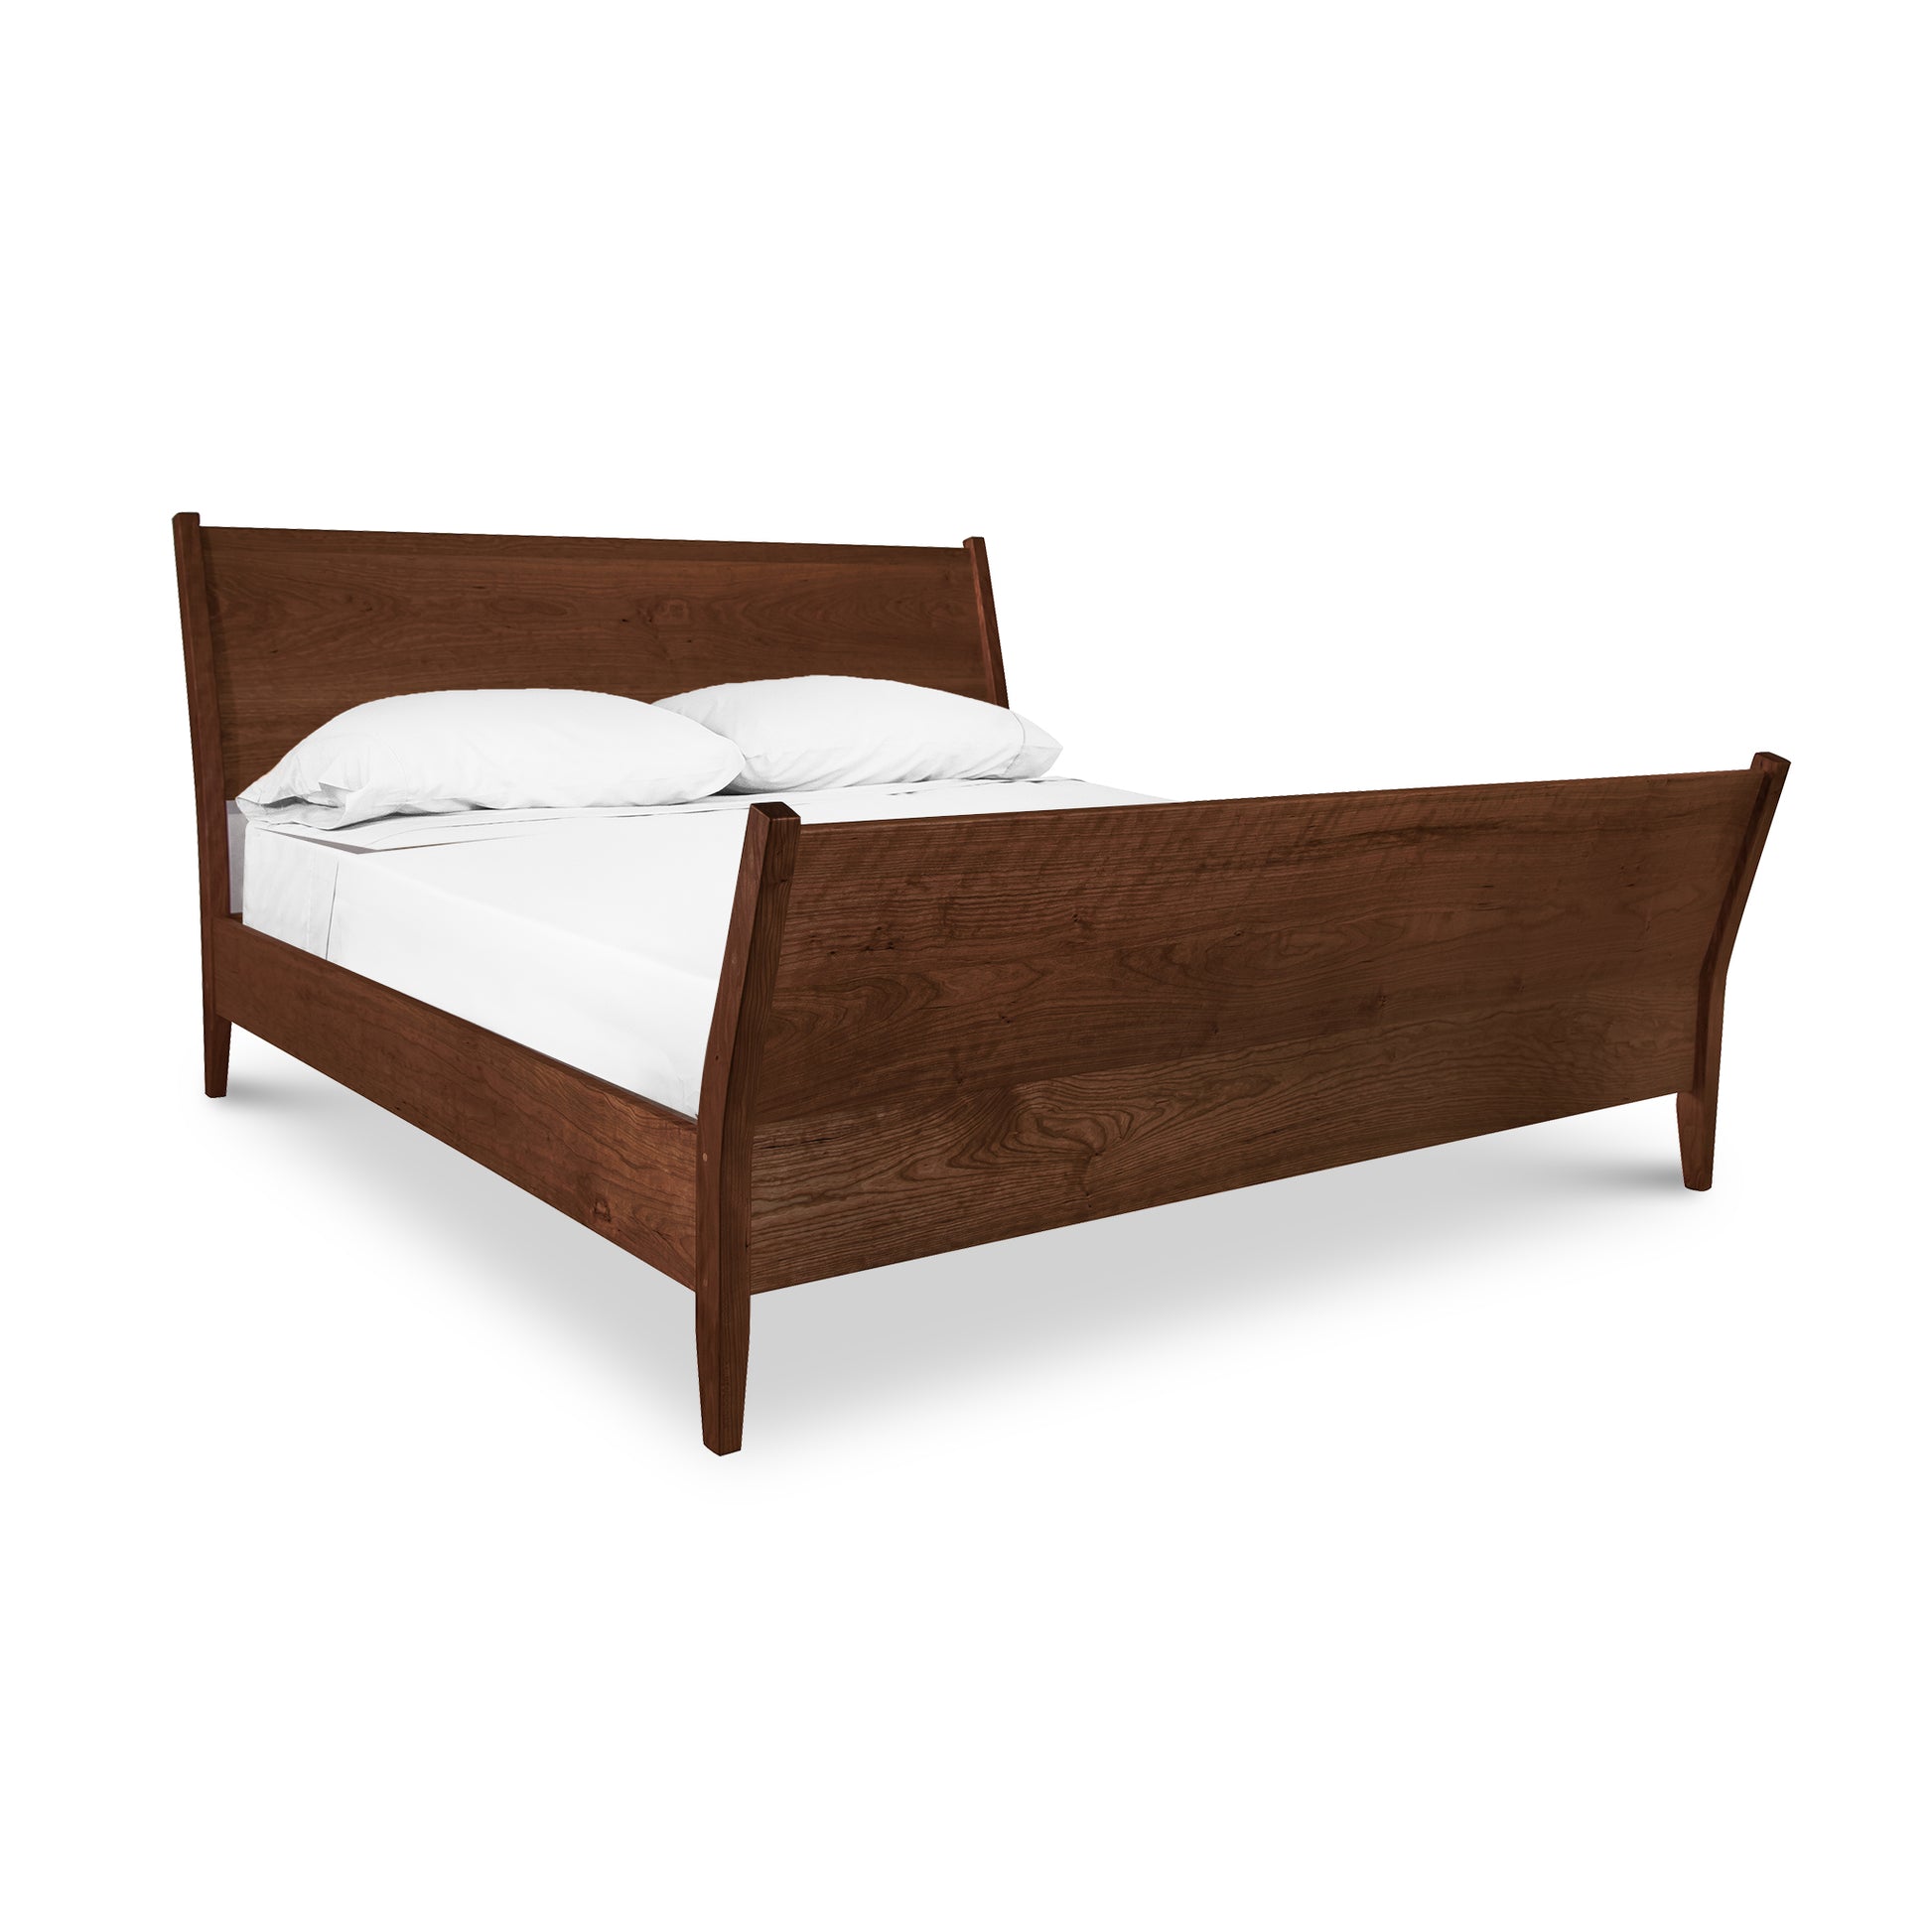 The Maple Corner Woodworks Andover Modern Incline Sleigh Bed features a wooden headboard and footboard, offering contemporary lines for a sleek and stylish look. Its design also prioritizes ergonomics for optimal comfort.